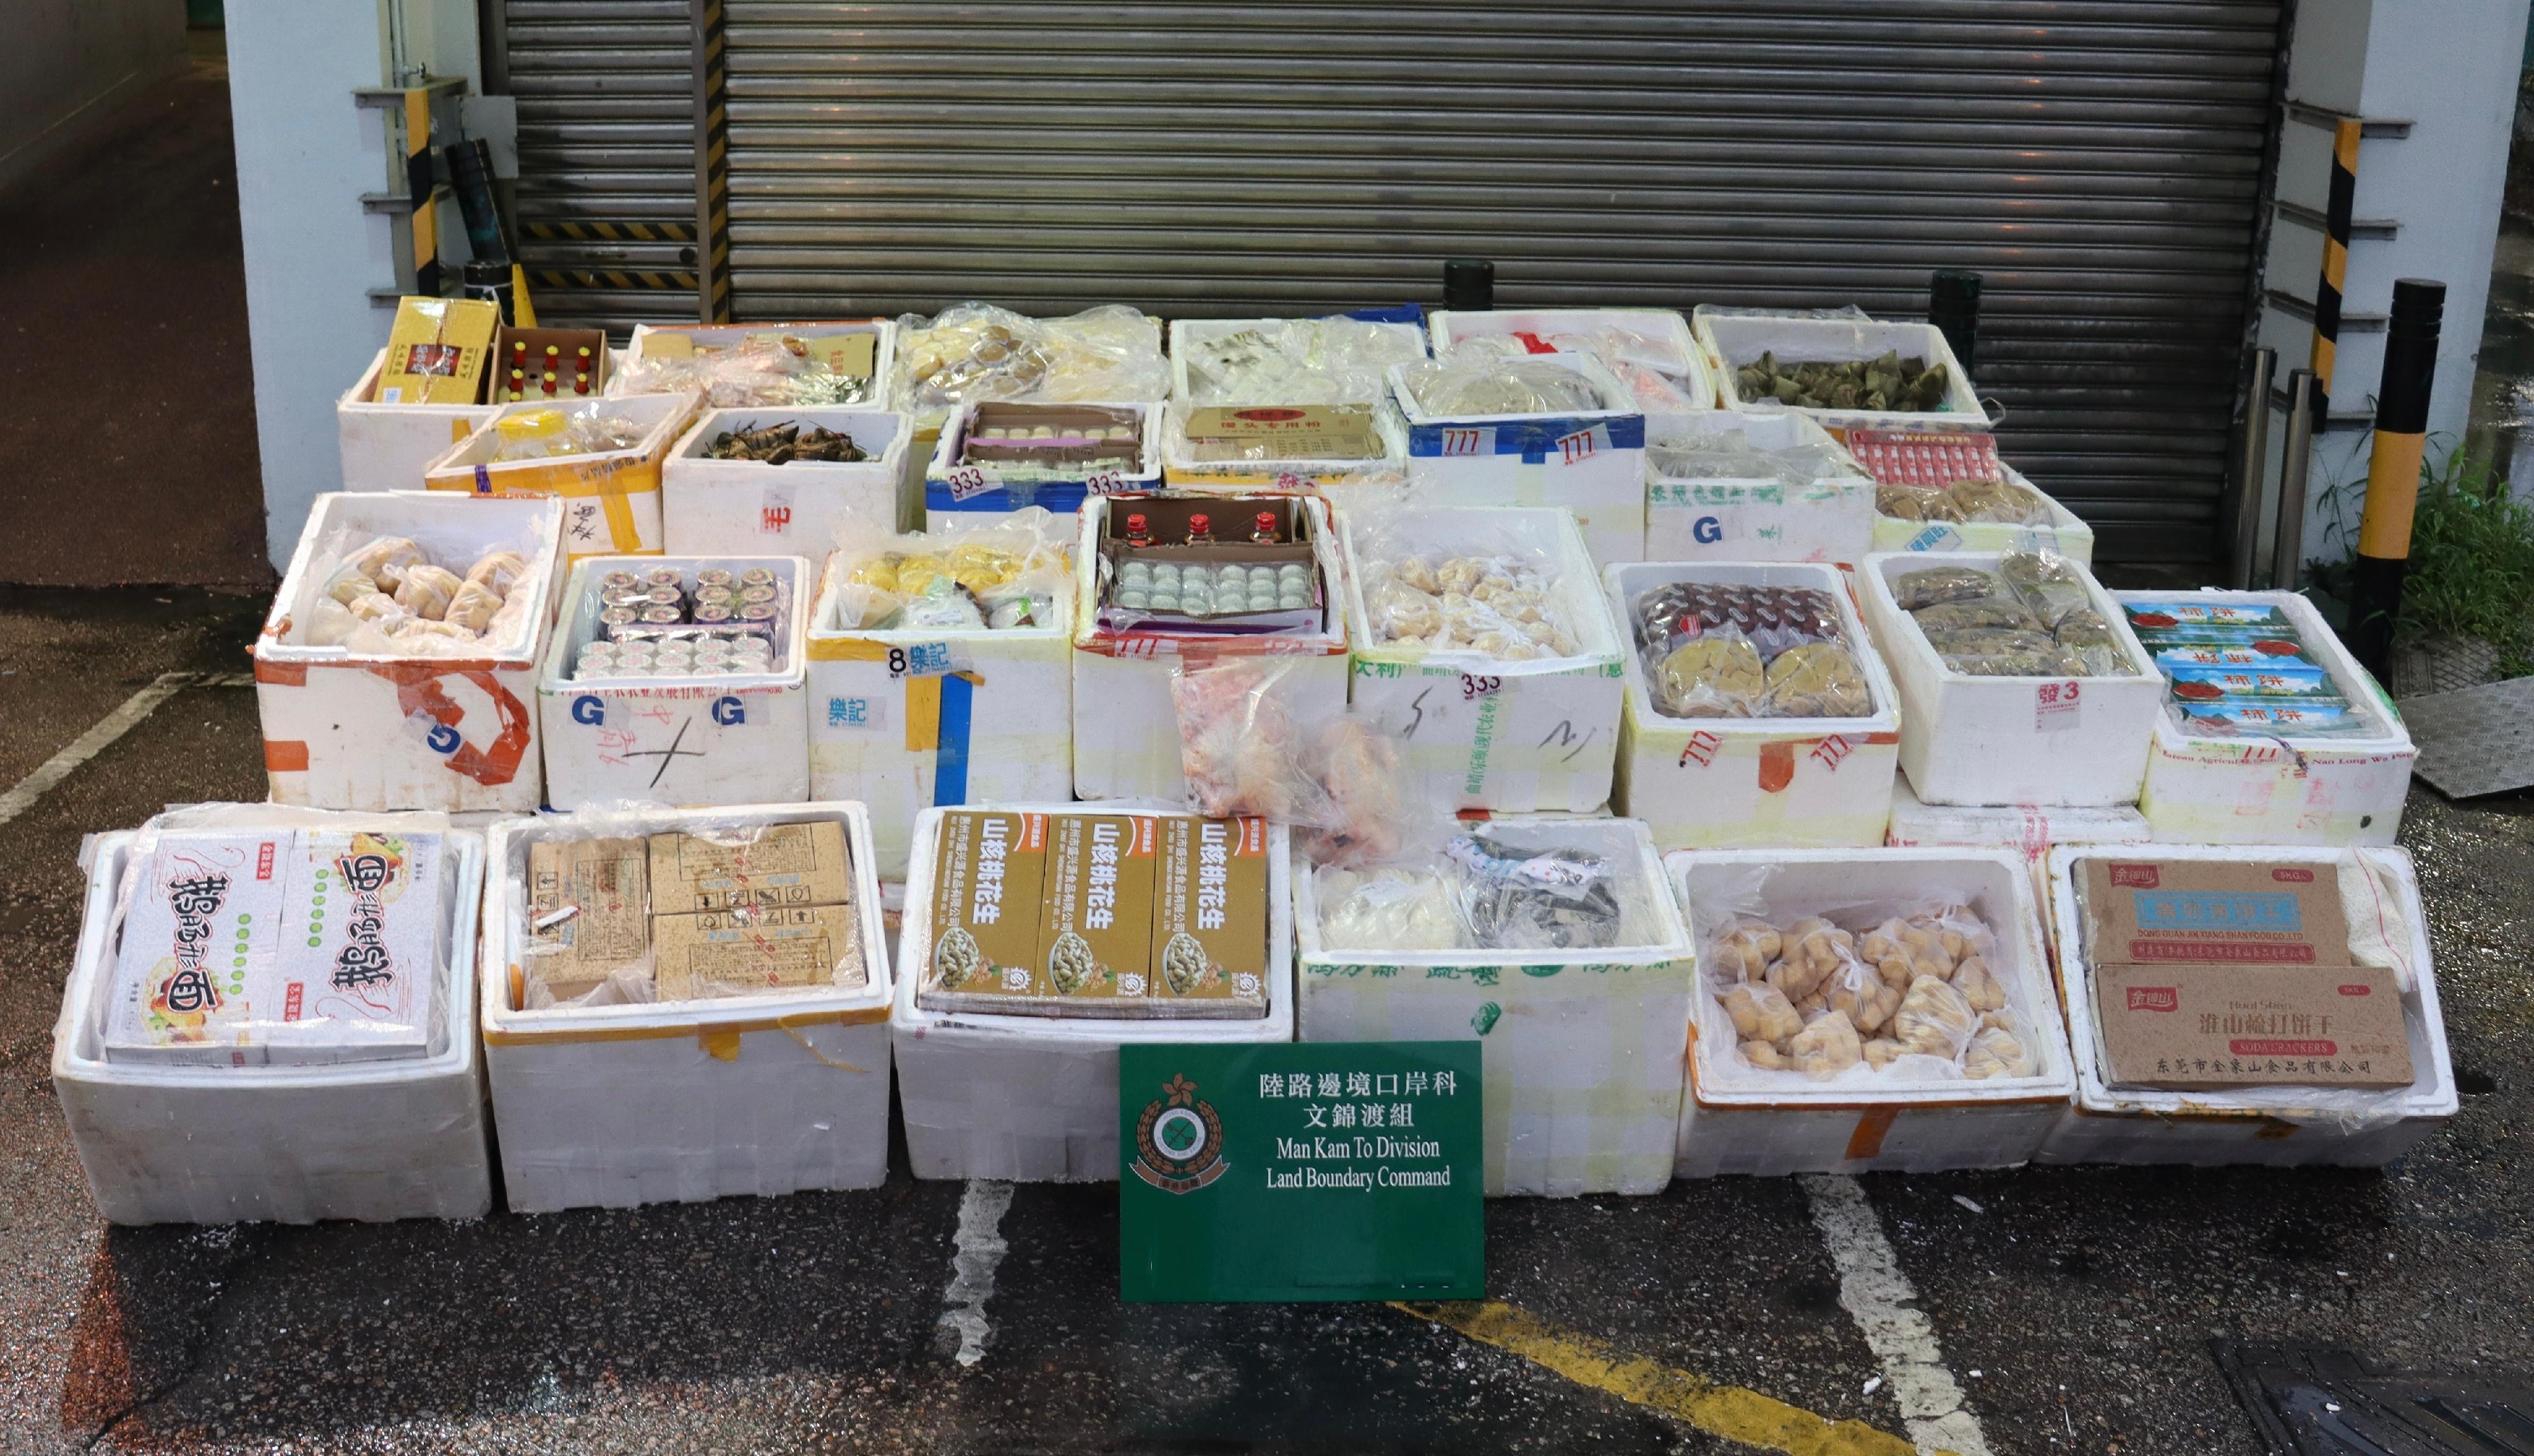 Hong Kong Customs and the Centre for Food Safety of the Food and Environmental Hygiene Department mounted a joint operation at the Man Kam To Control Point on March 25. More than 1 100 kilograms of suspected smuggled foodstuffs and poultry were seized. Photo shows the suspected smuggled foodstuffs and poultry seized.